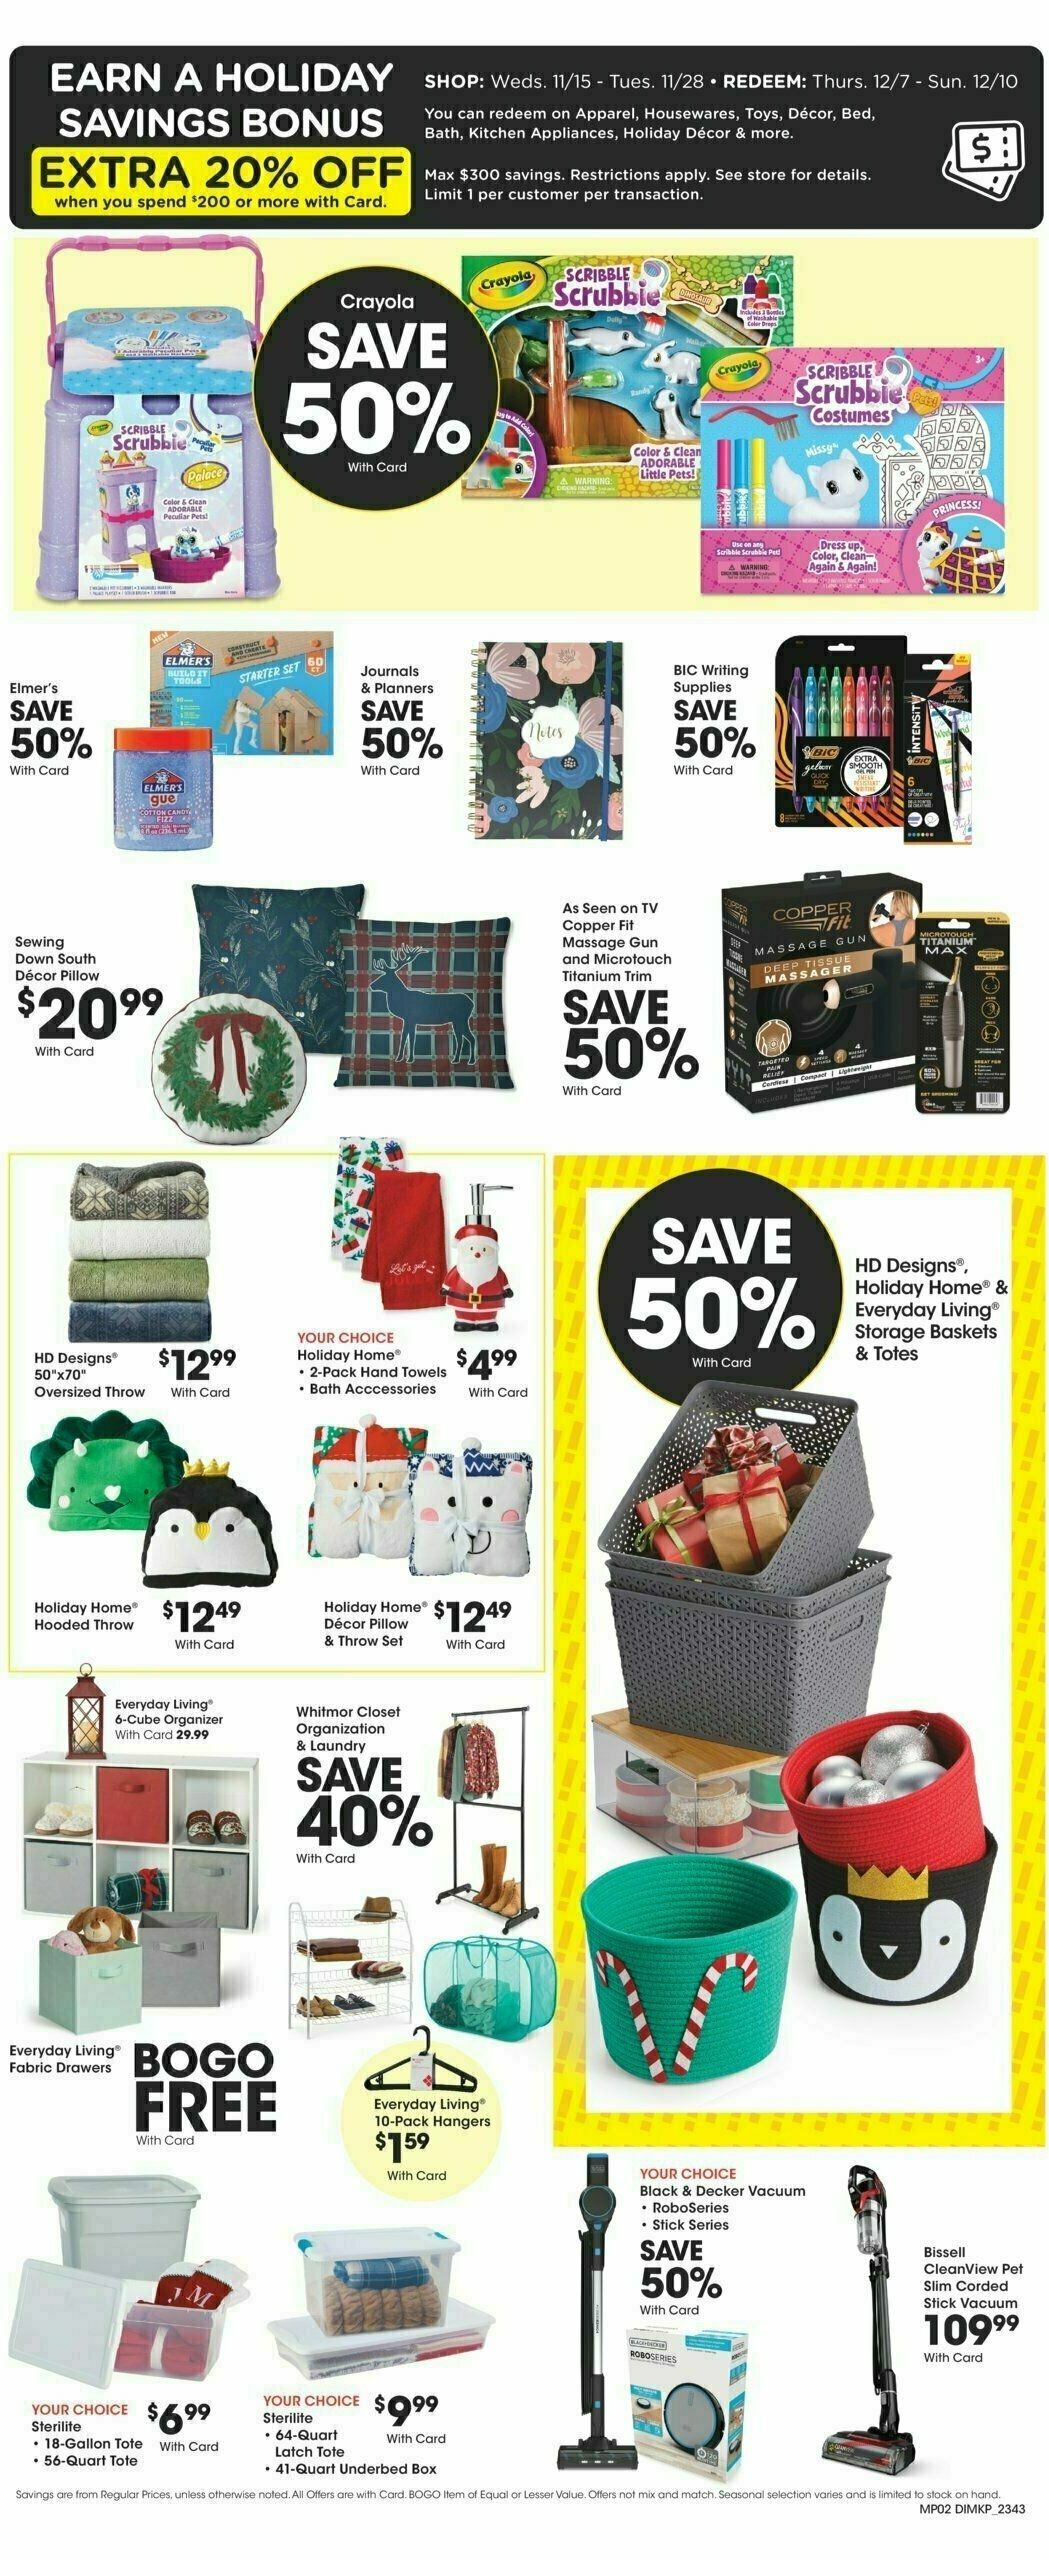 Dillons Black Friday 5-Day Sale Weekly Ad from November 24